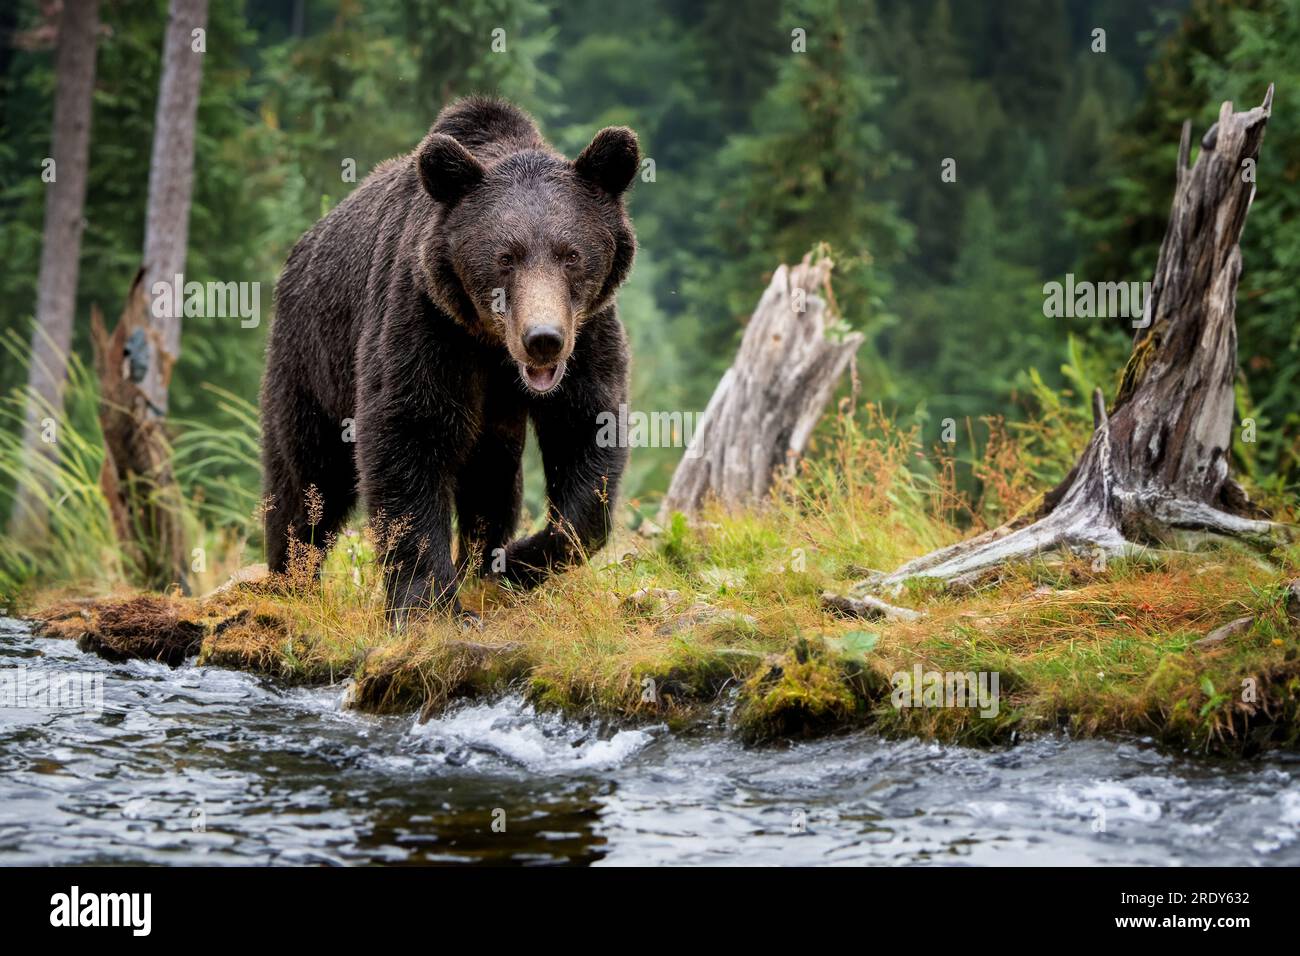 Adult brown bear walks along the bank of a mountain river in a natural environment Stock Photo